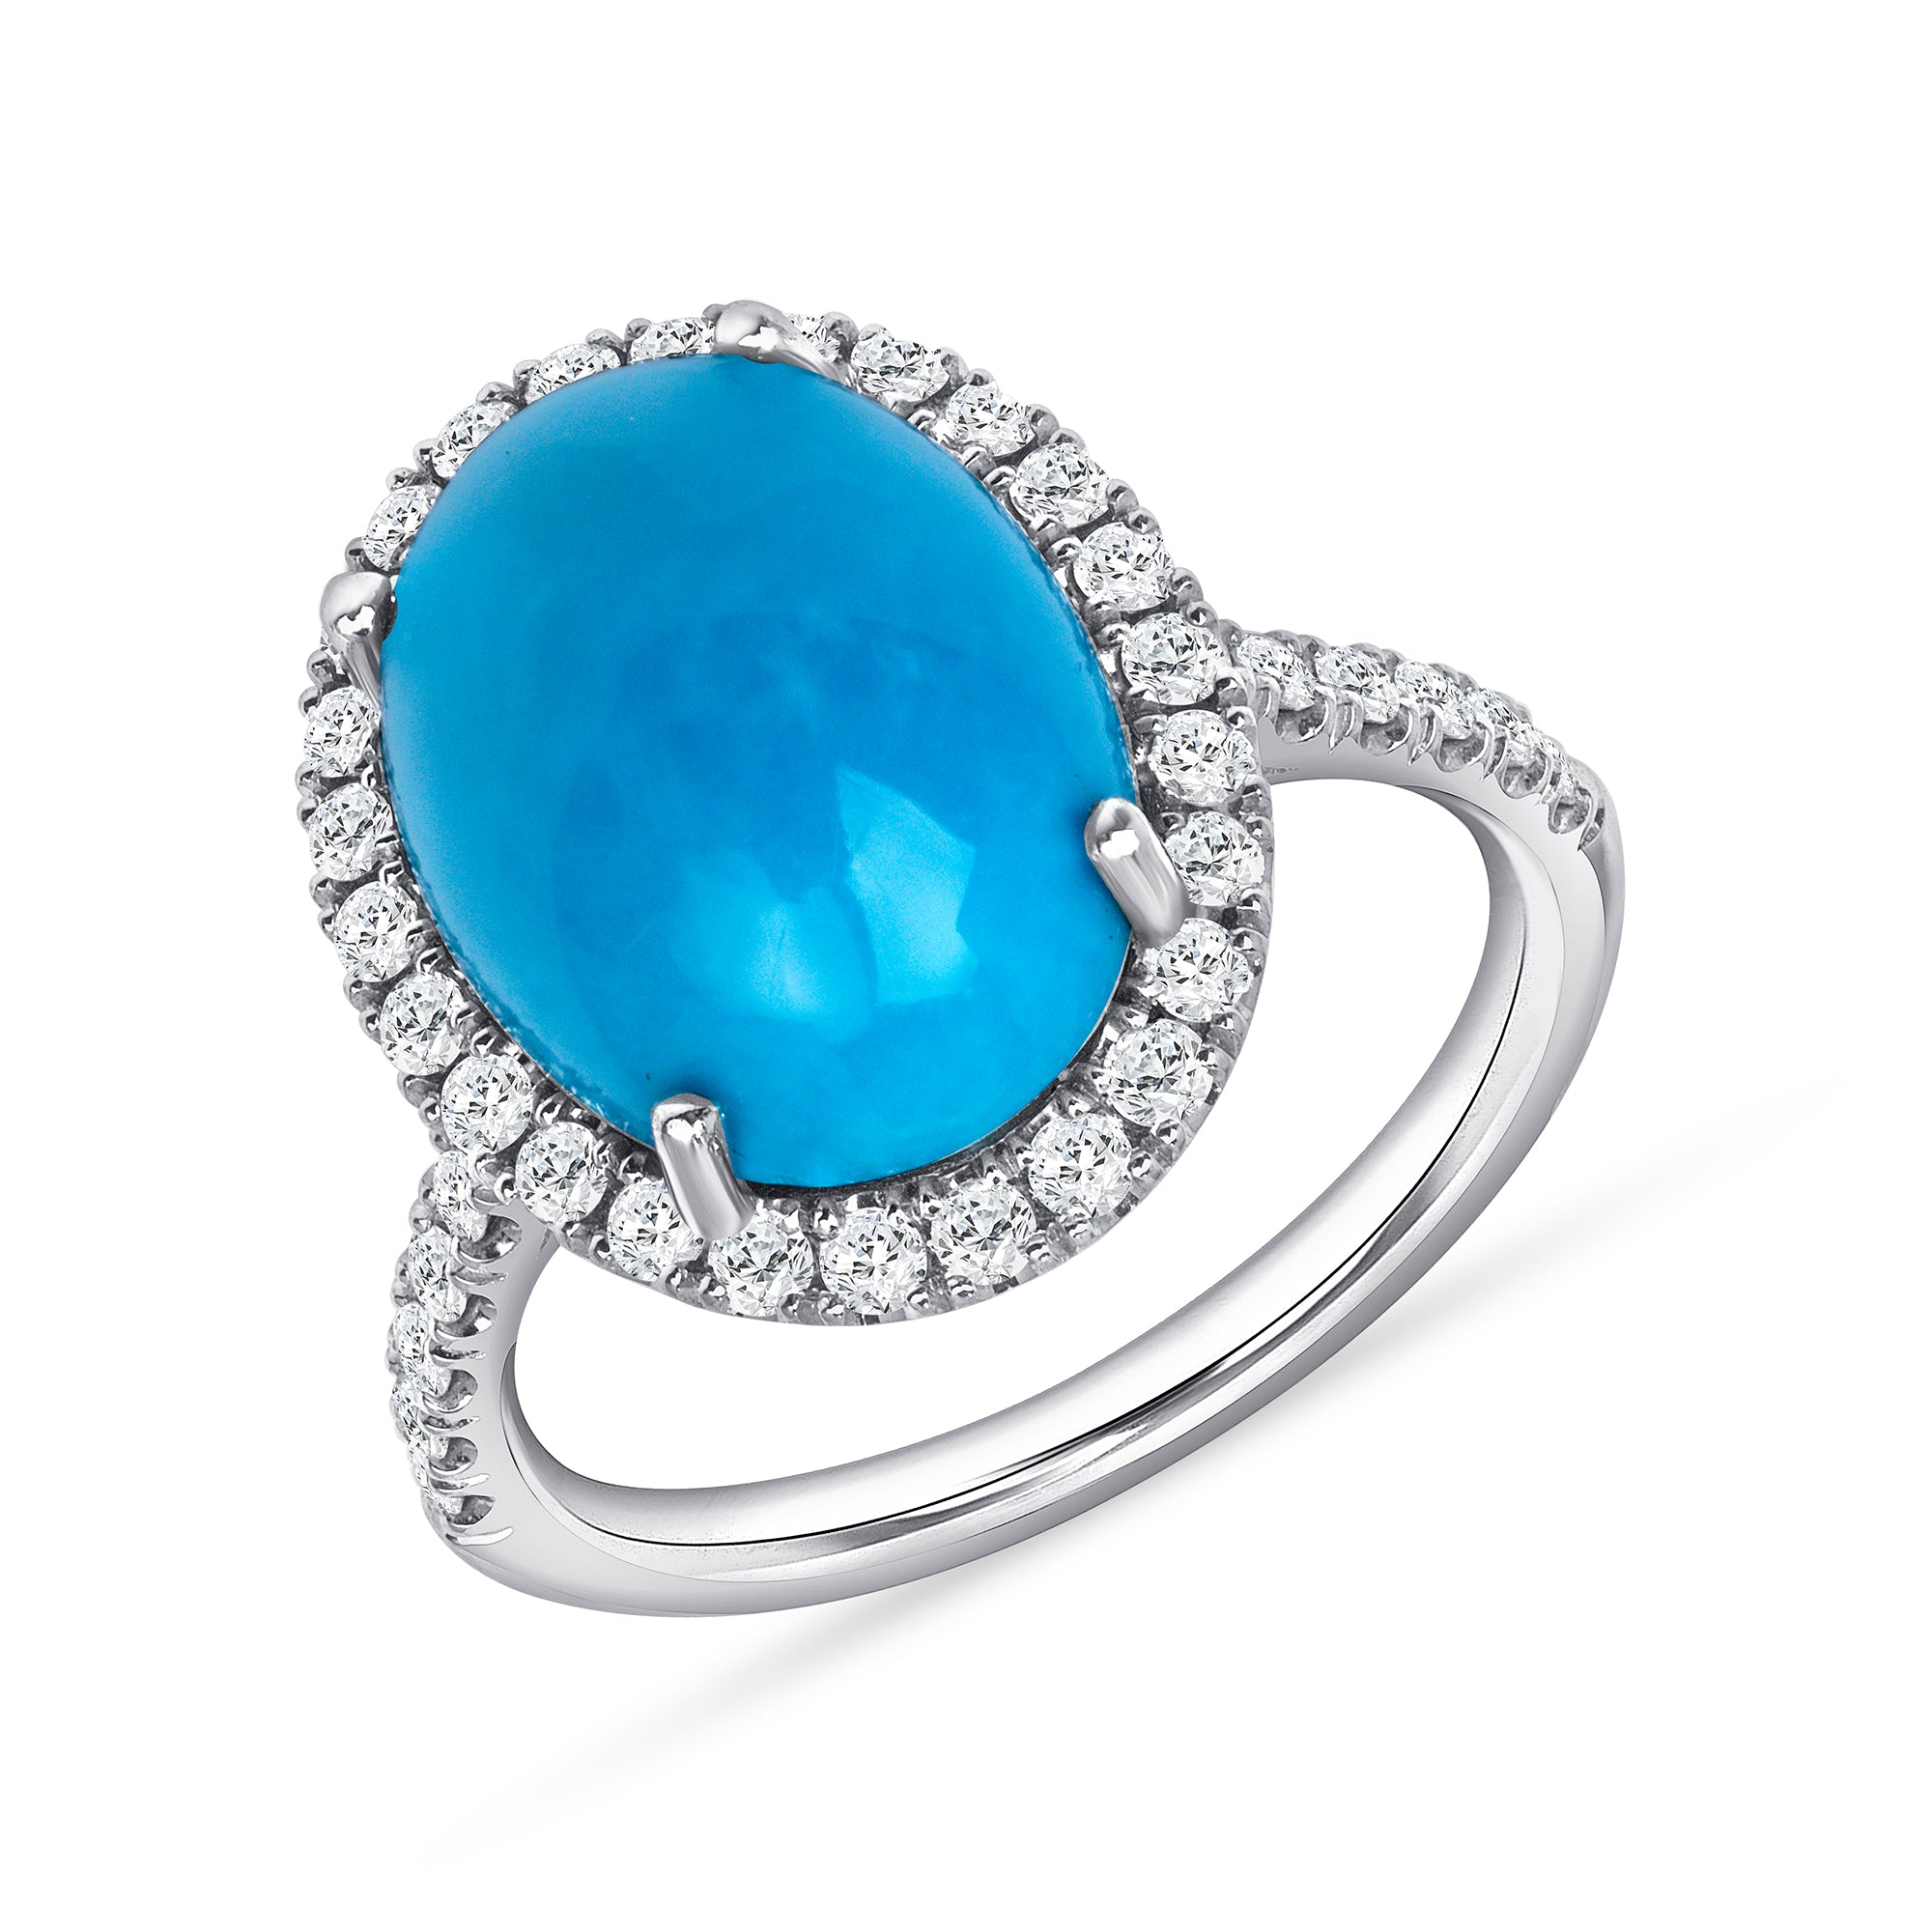 Oval Turquoise and Diamond Halo Ring in 14K White Gold